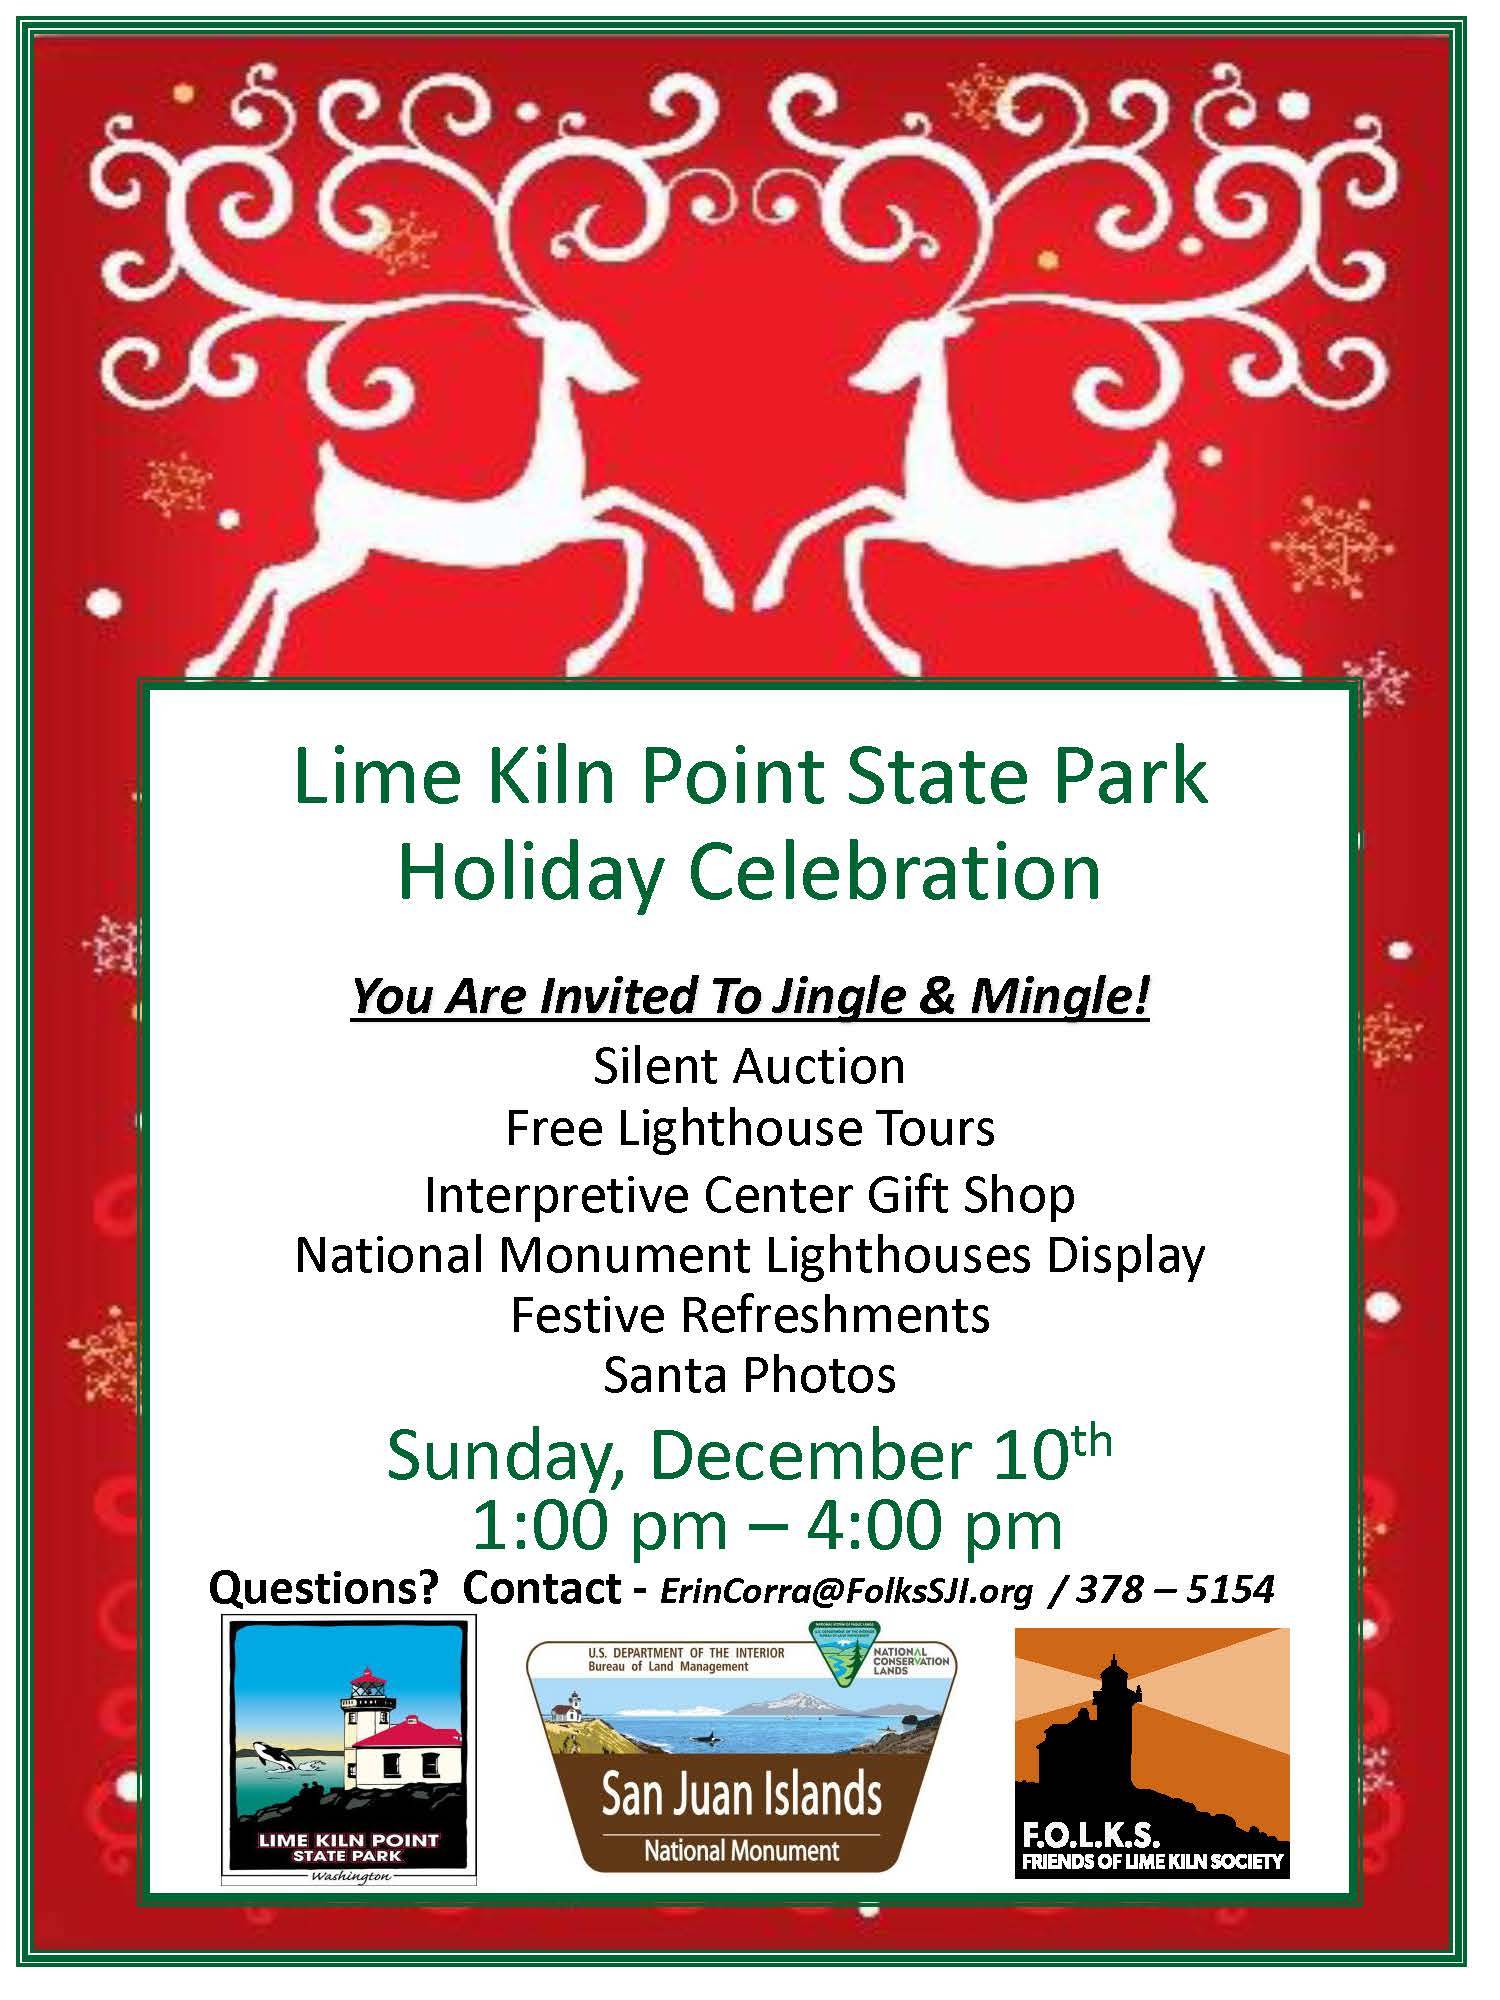 Celebrate the holidays at Lime Kiln